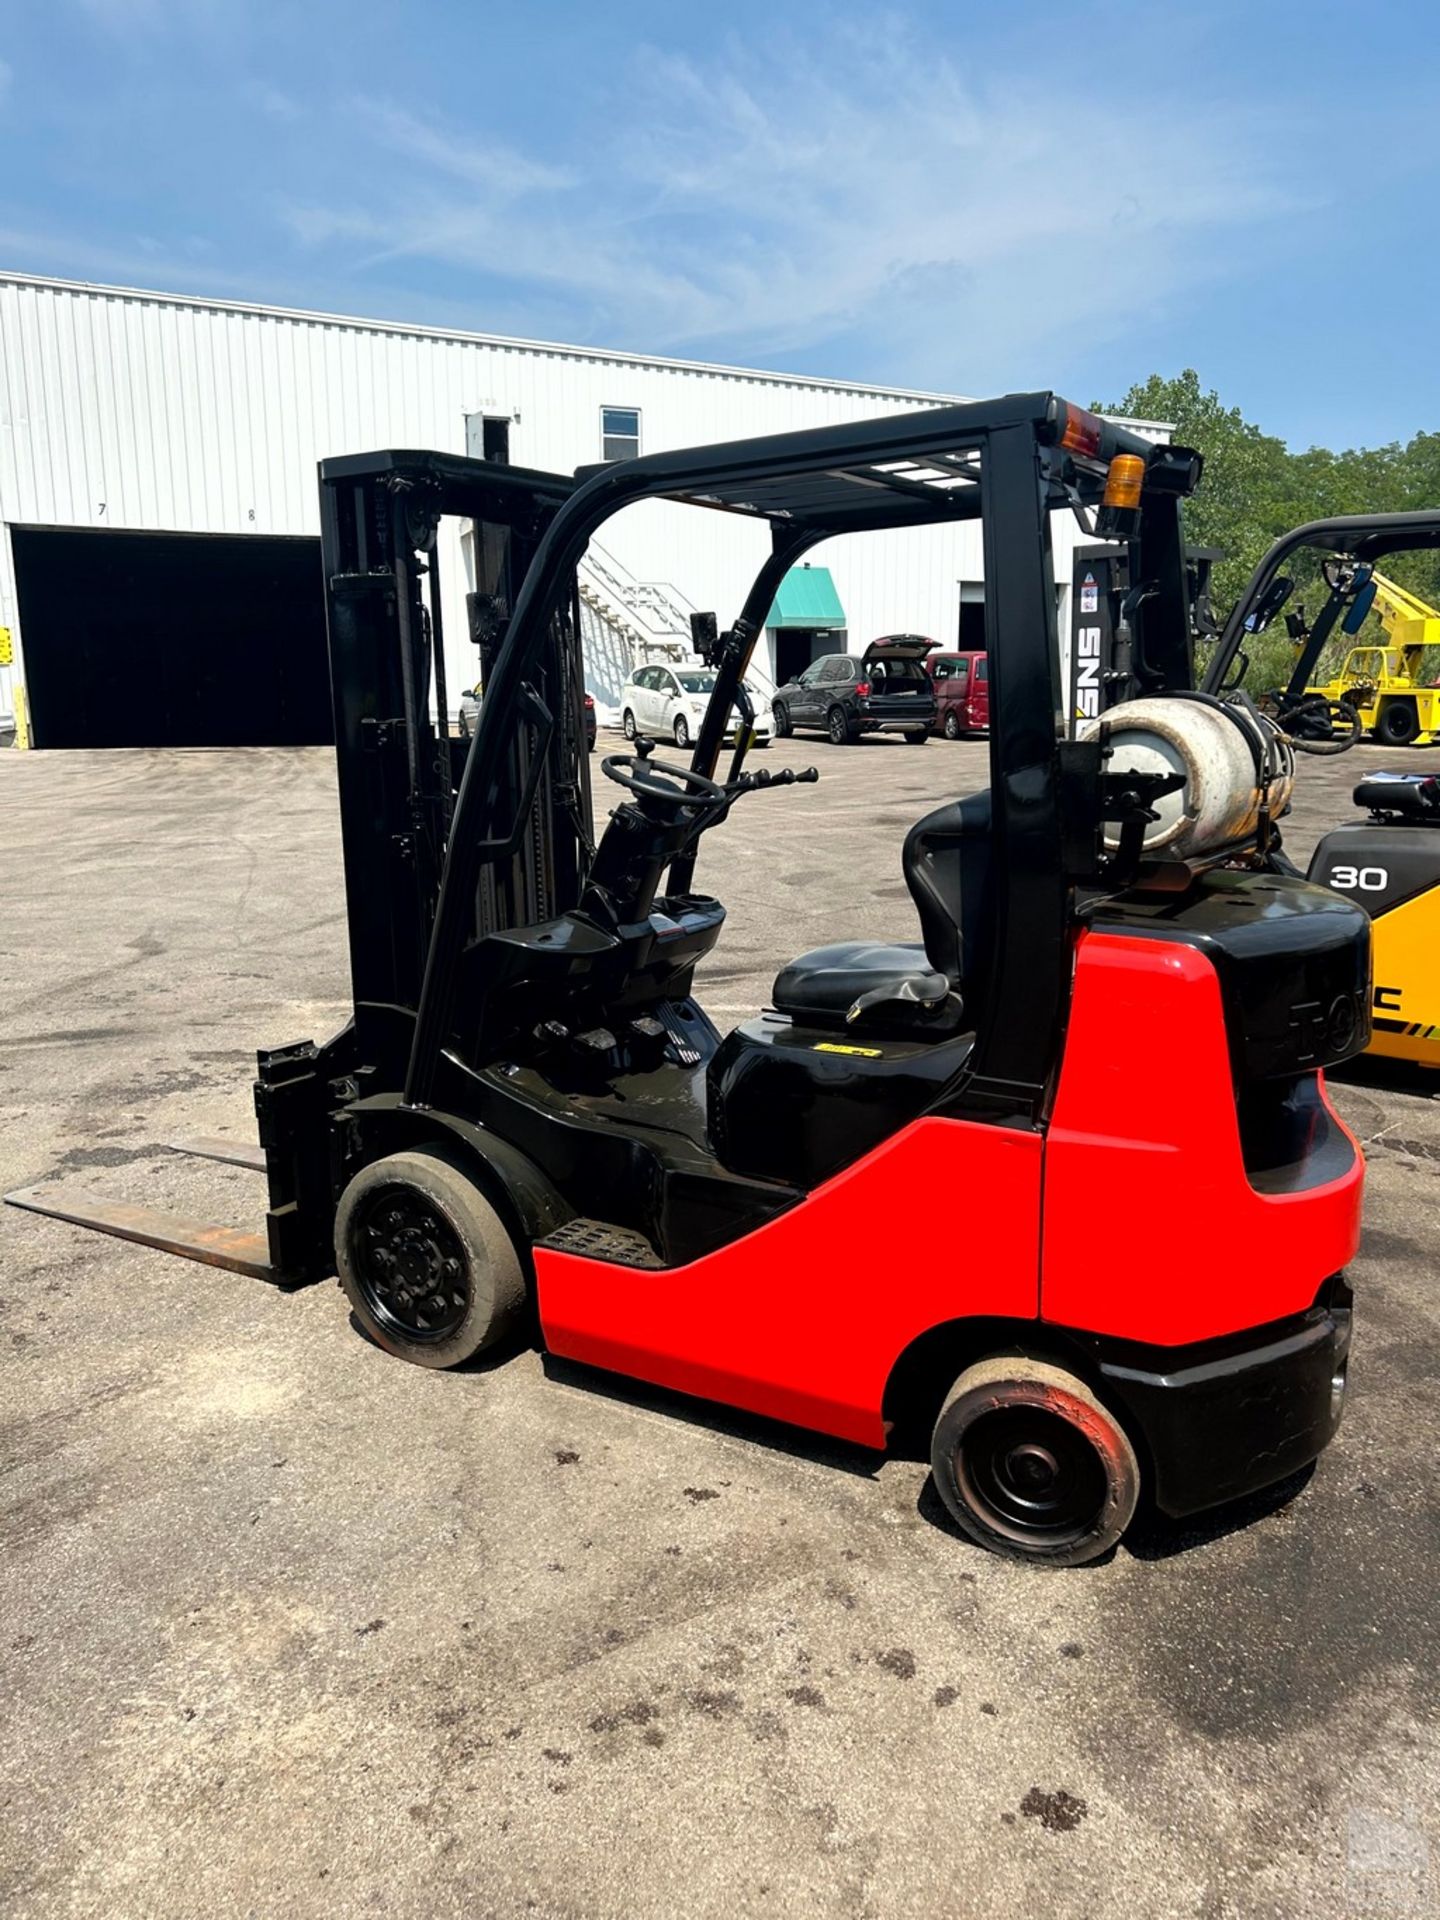 TOYOTA 5,000 LB. MODEL 42-FGC25 LP GAS FORKLIFT TRUCK, S/N 78275, WITH TURNTABLE - Image 2 of 9